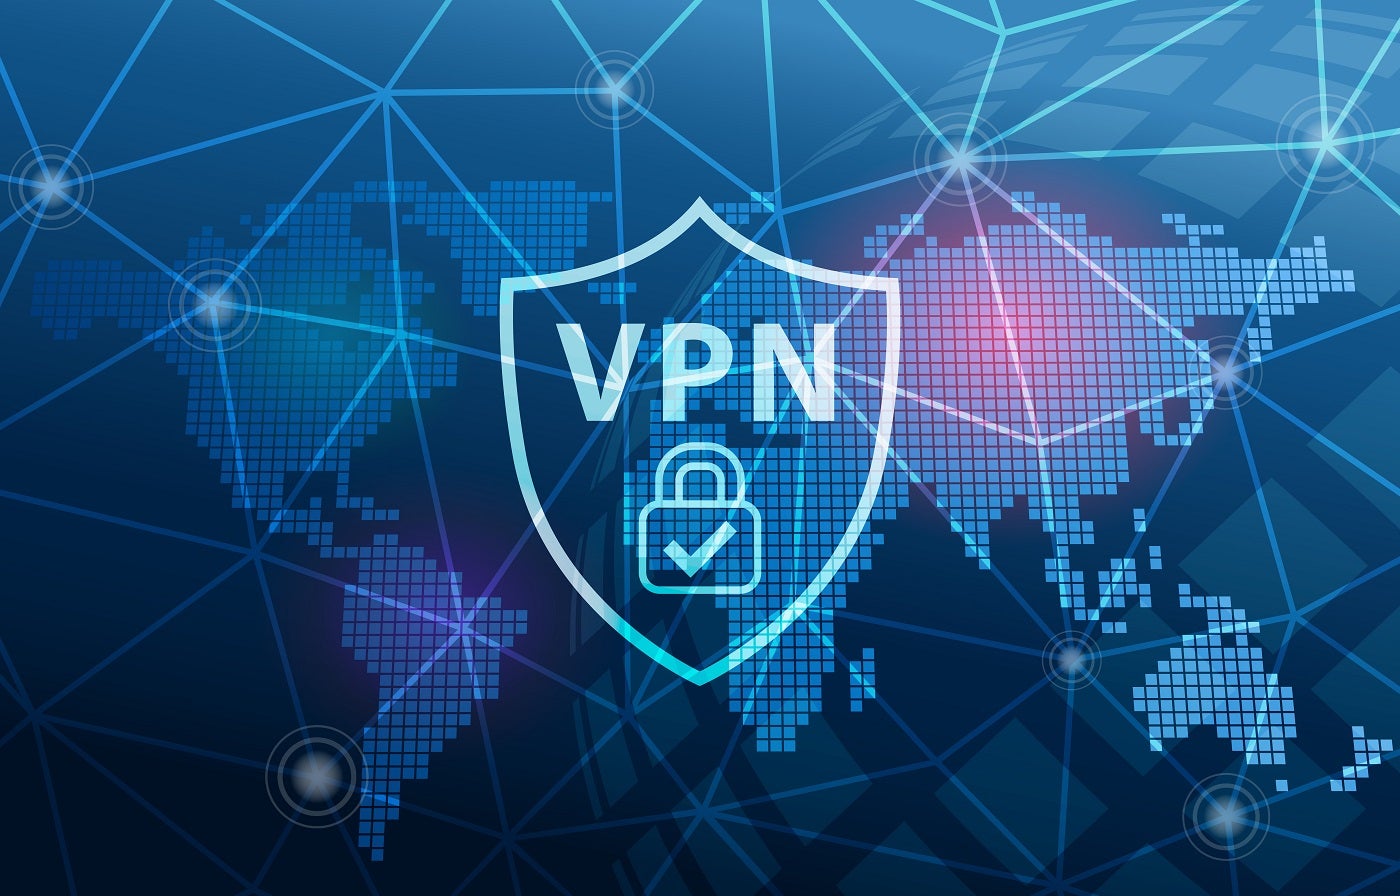 4 Different Types of VPNs & When to Use Them